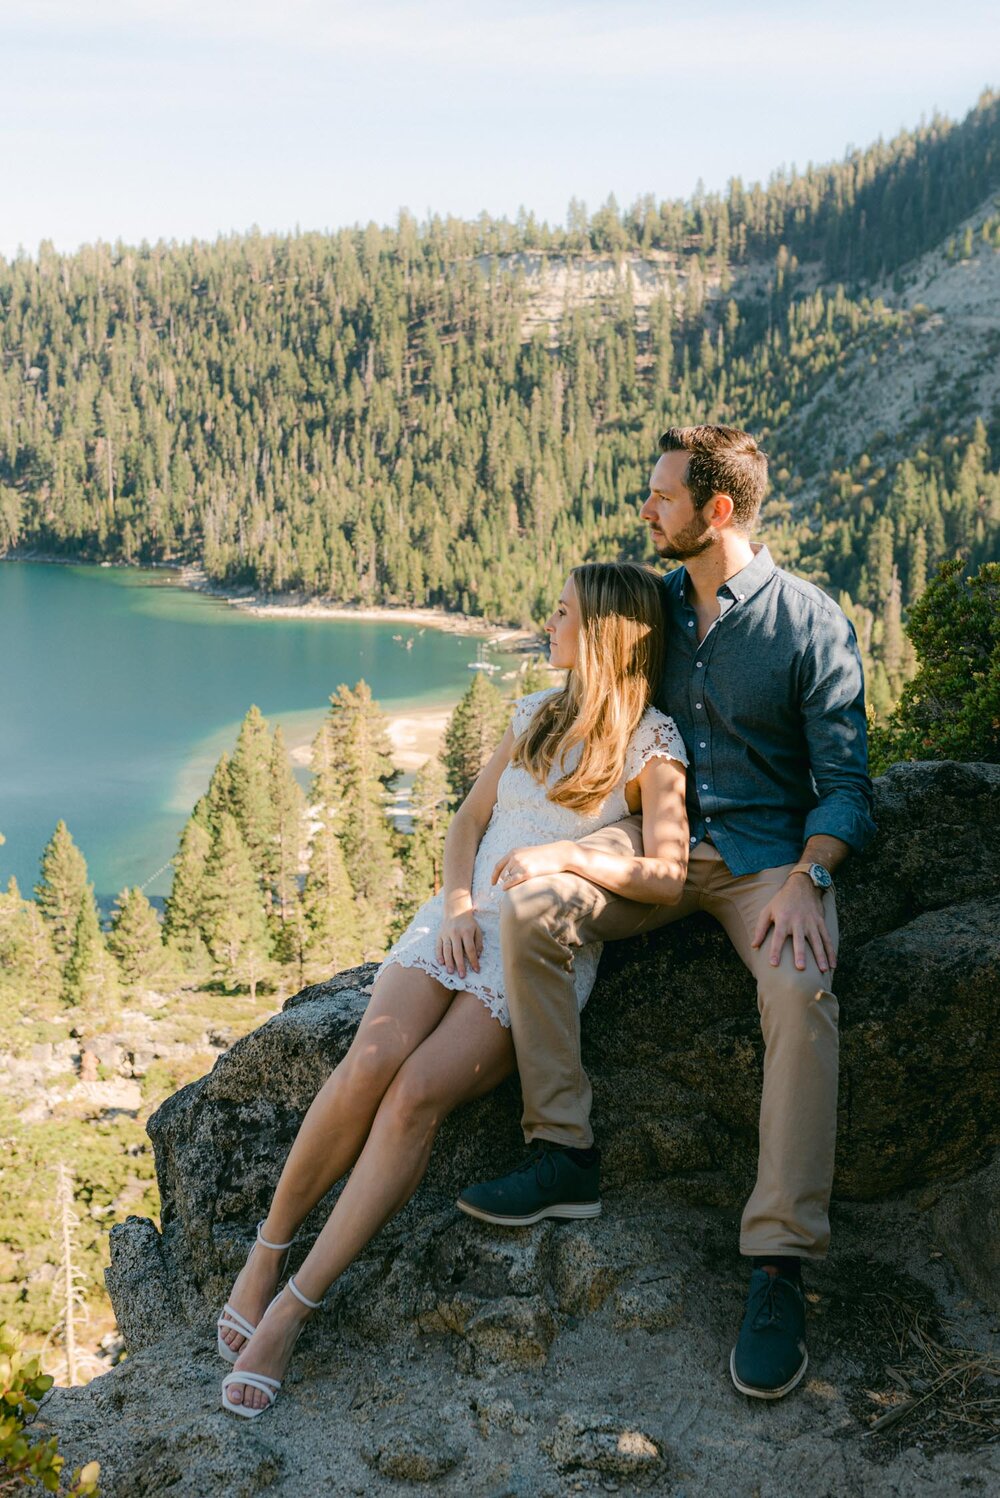 Engagement photos at Lake Tahoe\'s top proposal locations: Emerald Bay State Park, Squaw Valley Ski Resort, and Sand Harbor Beach